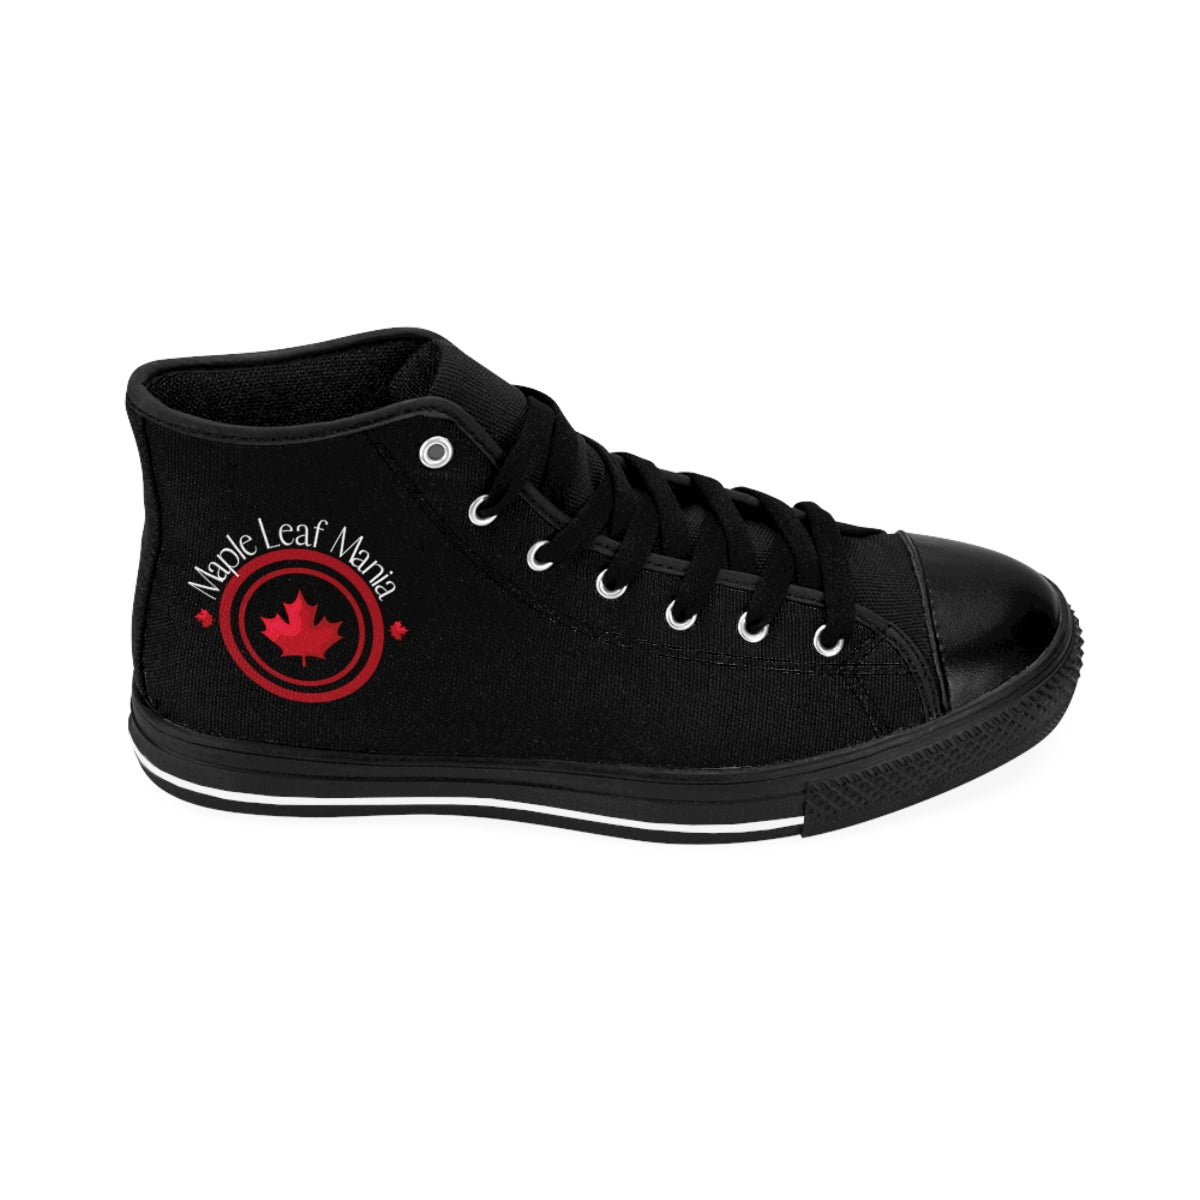 MEN'S HIGH TOP CLASSIC SNEAKERS, MAPLE LEAF MANIA SNEAKERS, BLACK HIGH TOP SNEAKERS